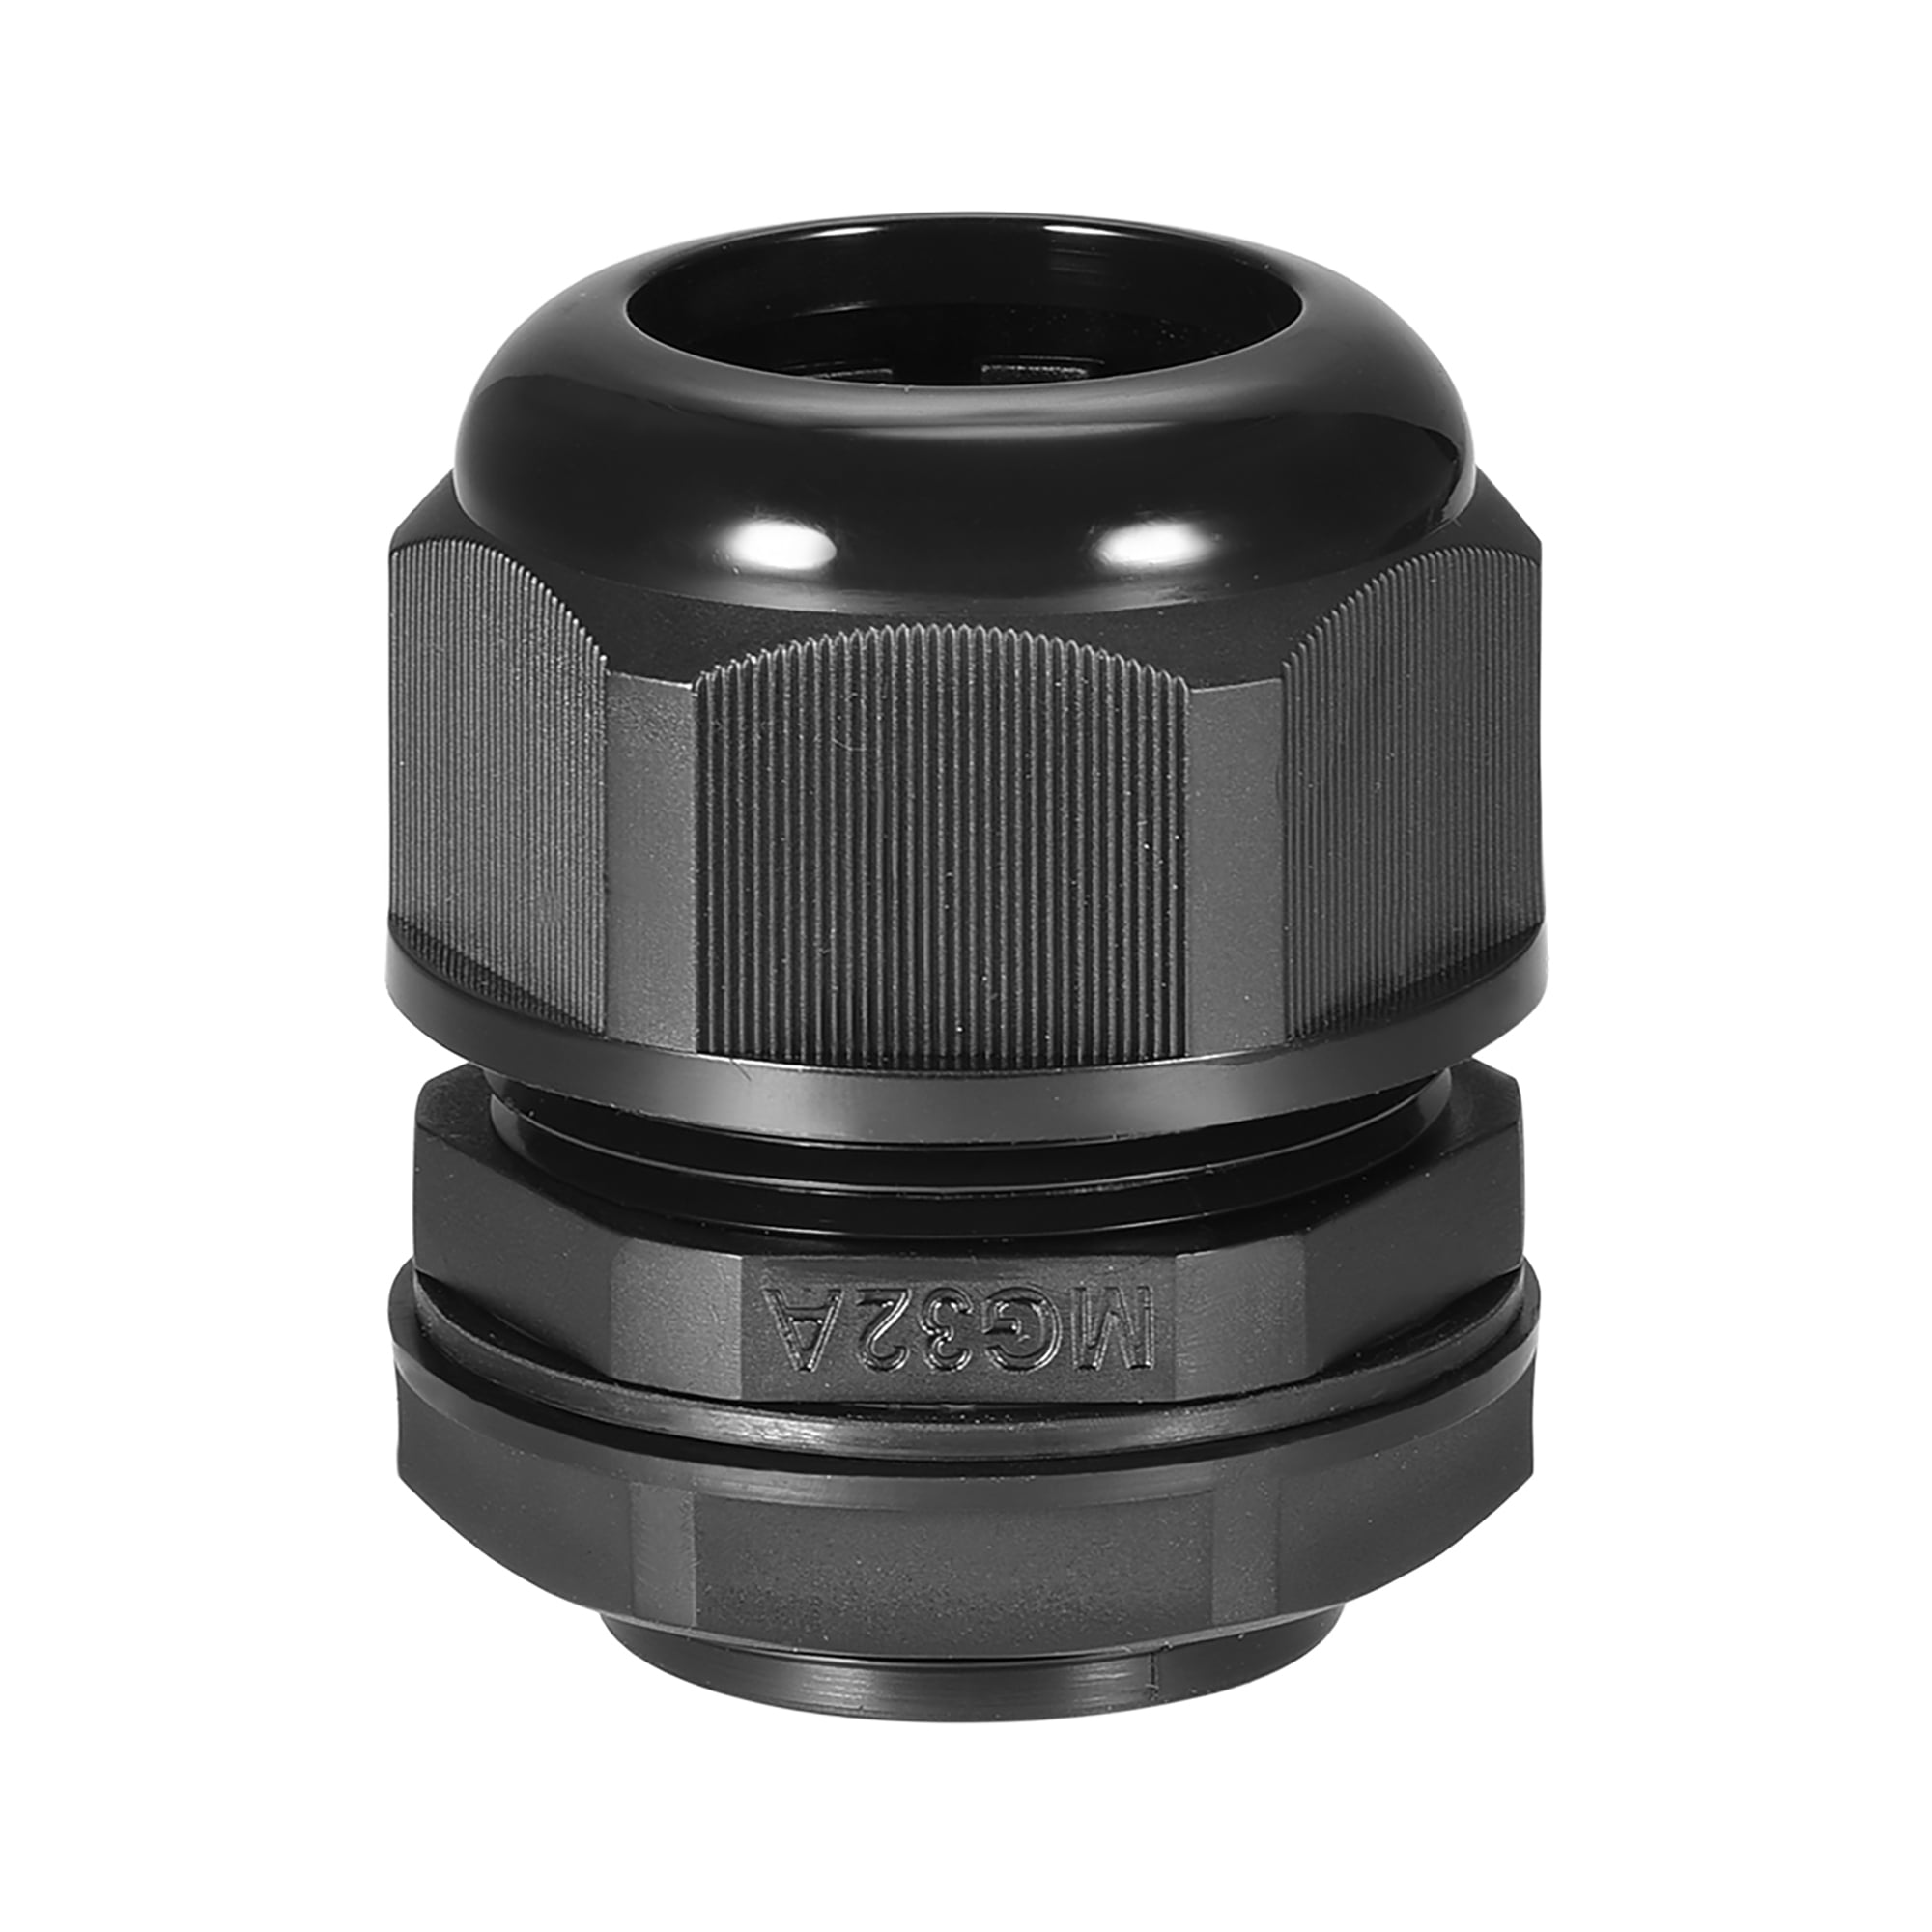 Details about   M32 Cable Gland 5 Holes Waterproof IP68 Nylon Joint Locknut for 6-8mm Dia Wire 